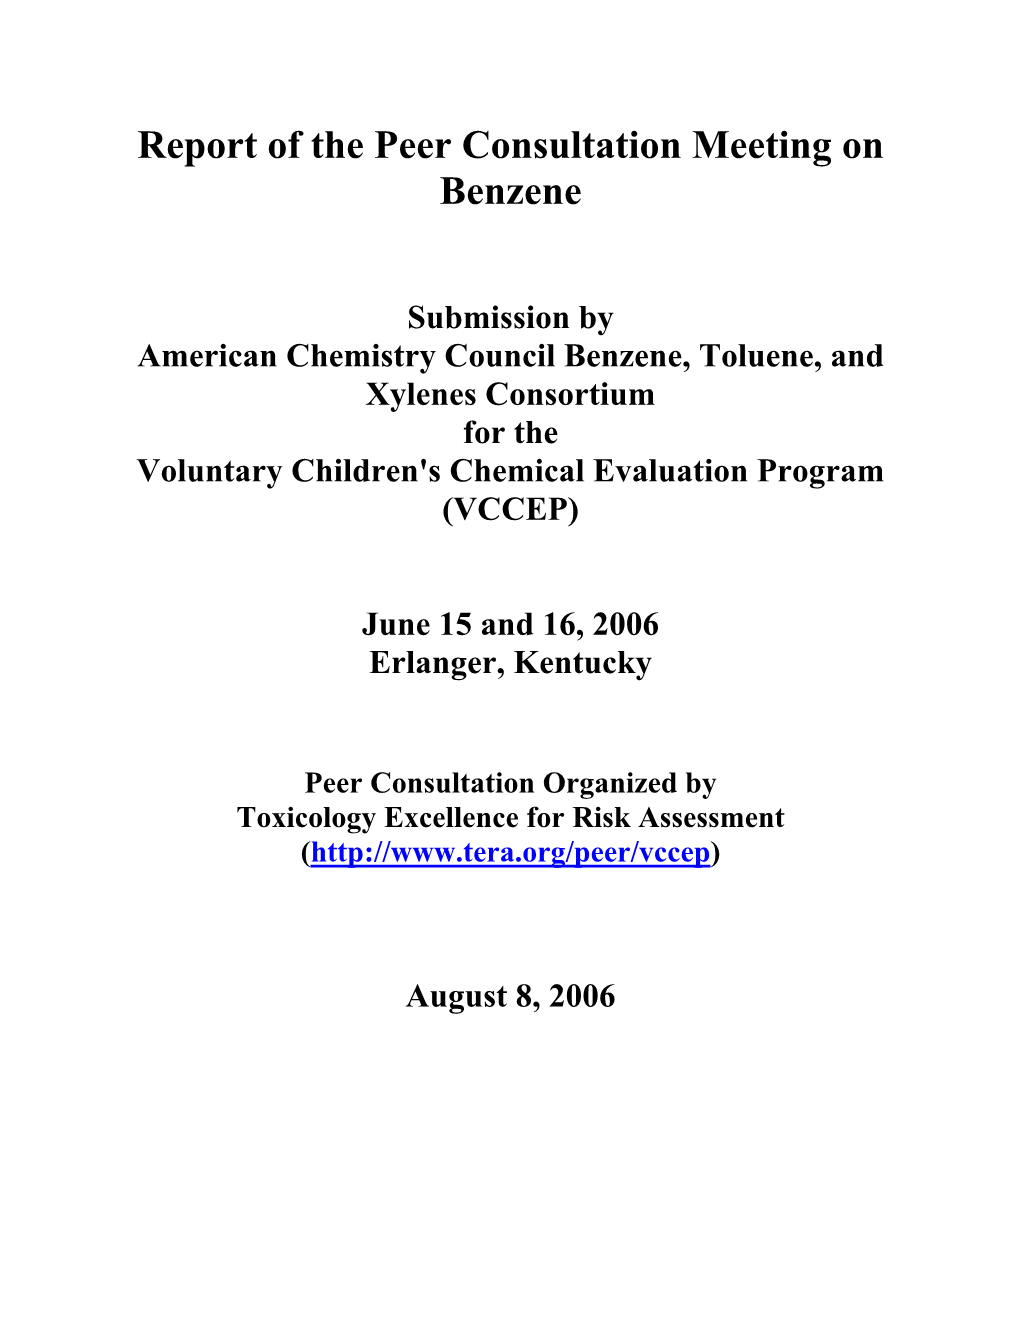 Report of the Peer Consultation Meeting on Benzene